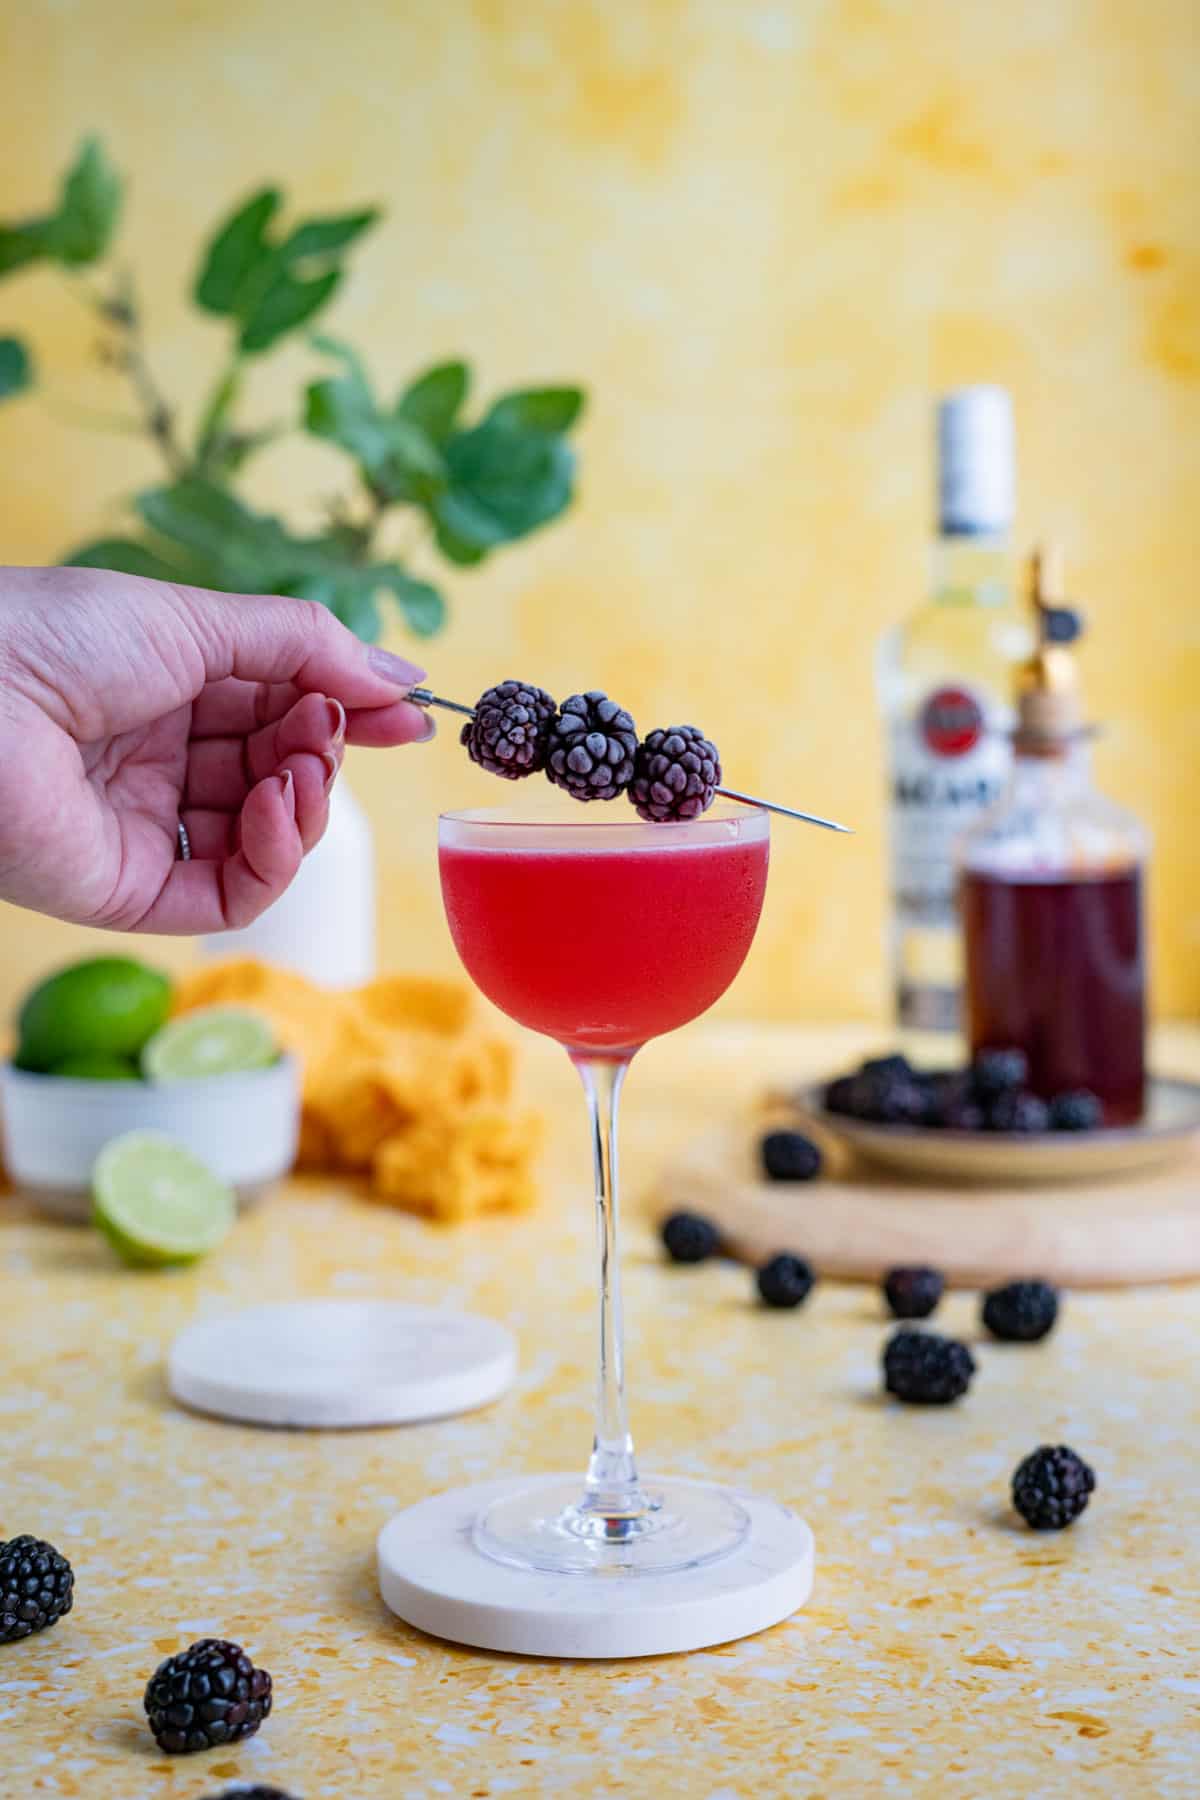 A hand from out of frame is garnishing a blackberry daiquiri with a cocktail pick that has been skewered with three blackberries.